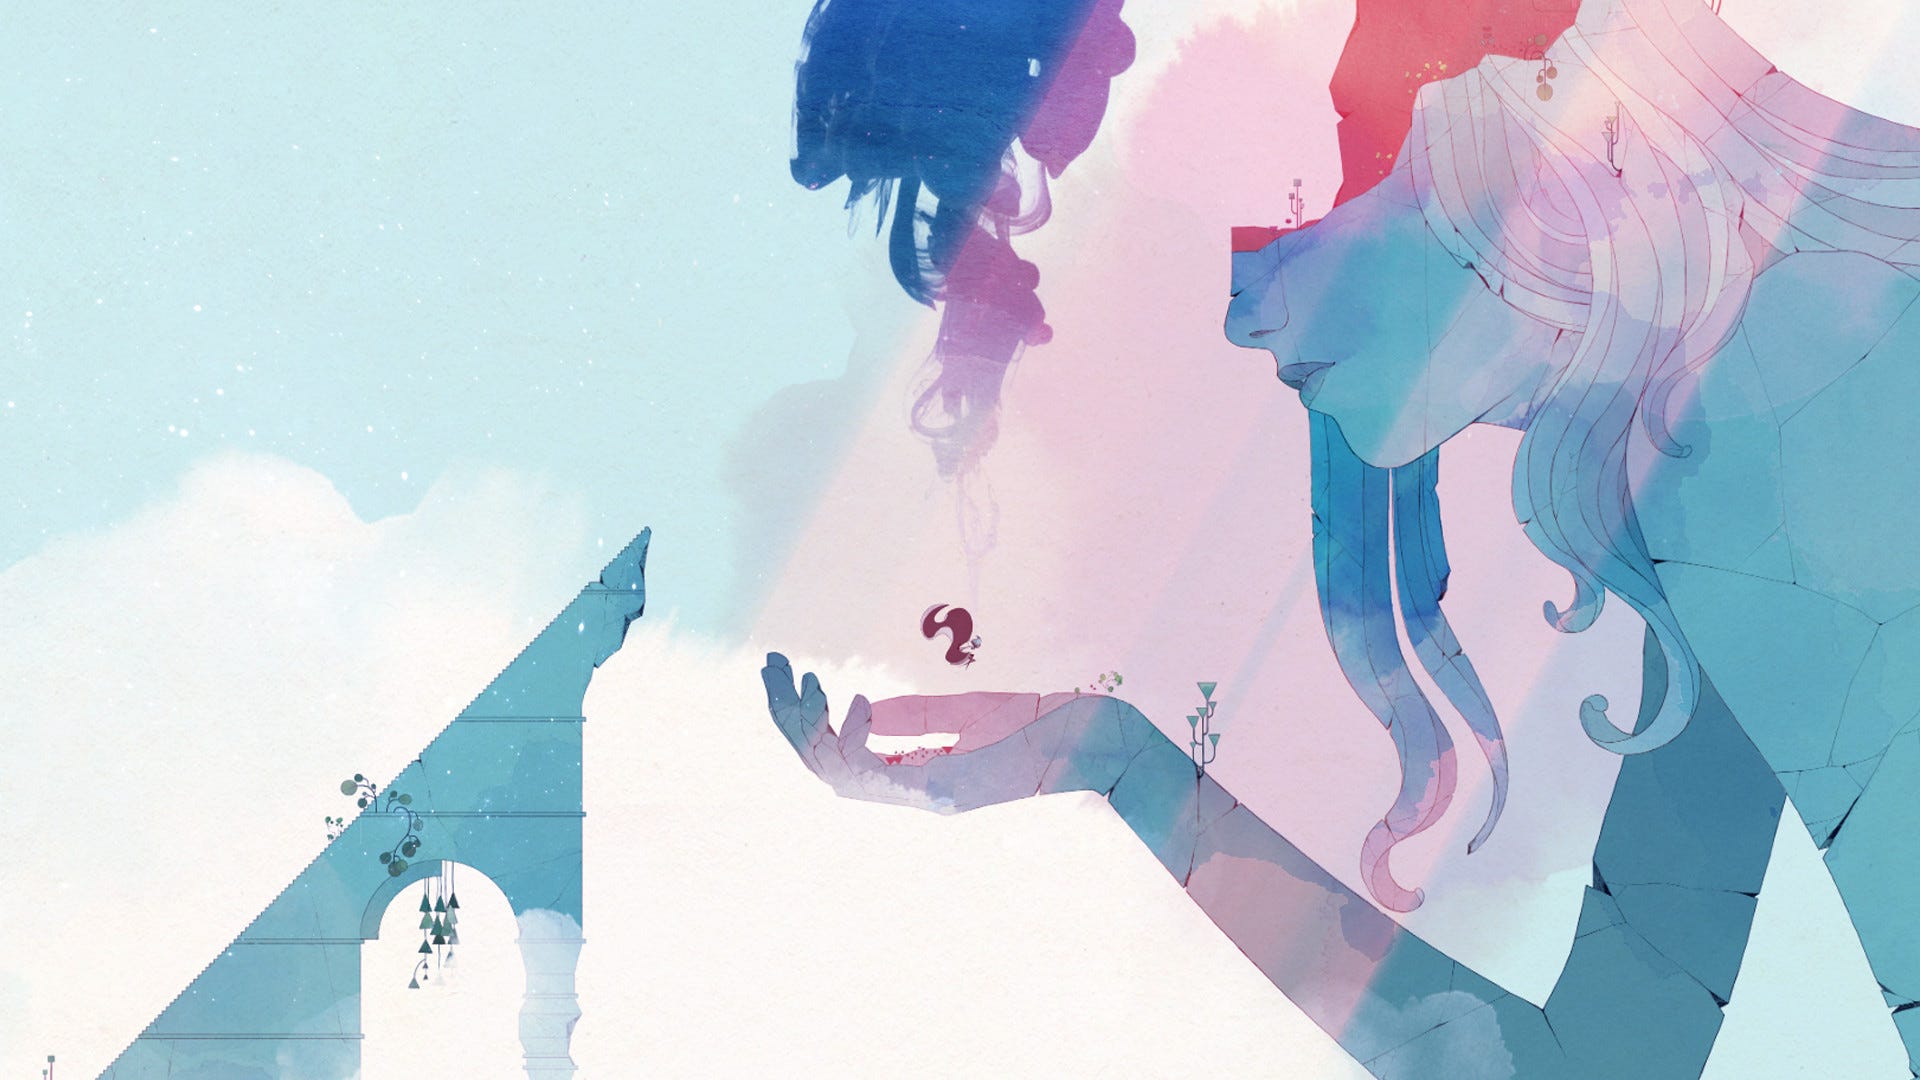 Gris is about as sexually suggestive as Sesame Street